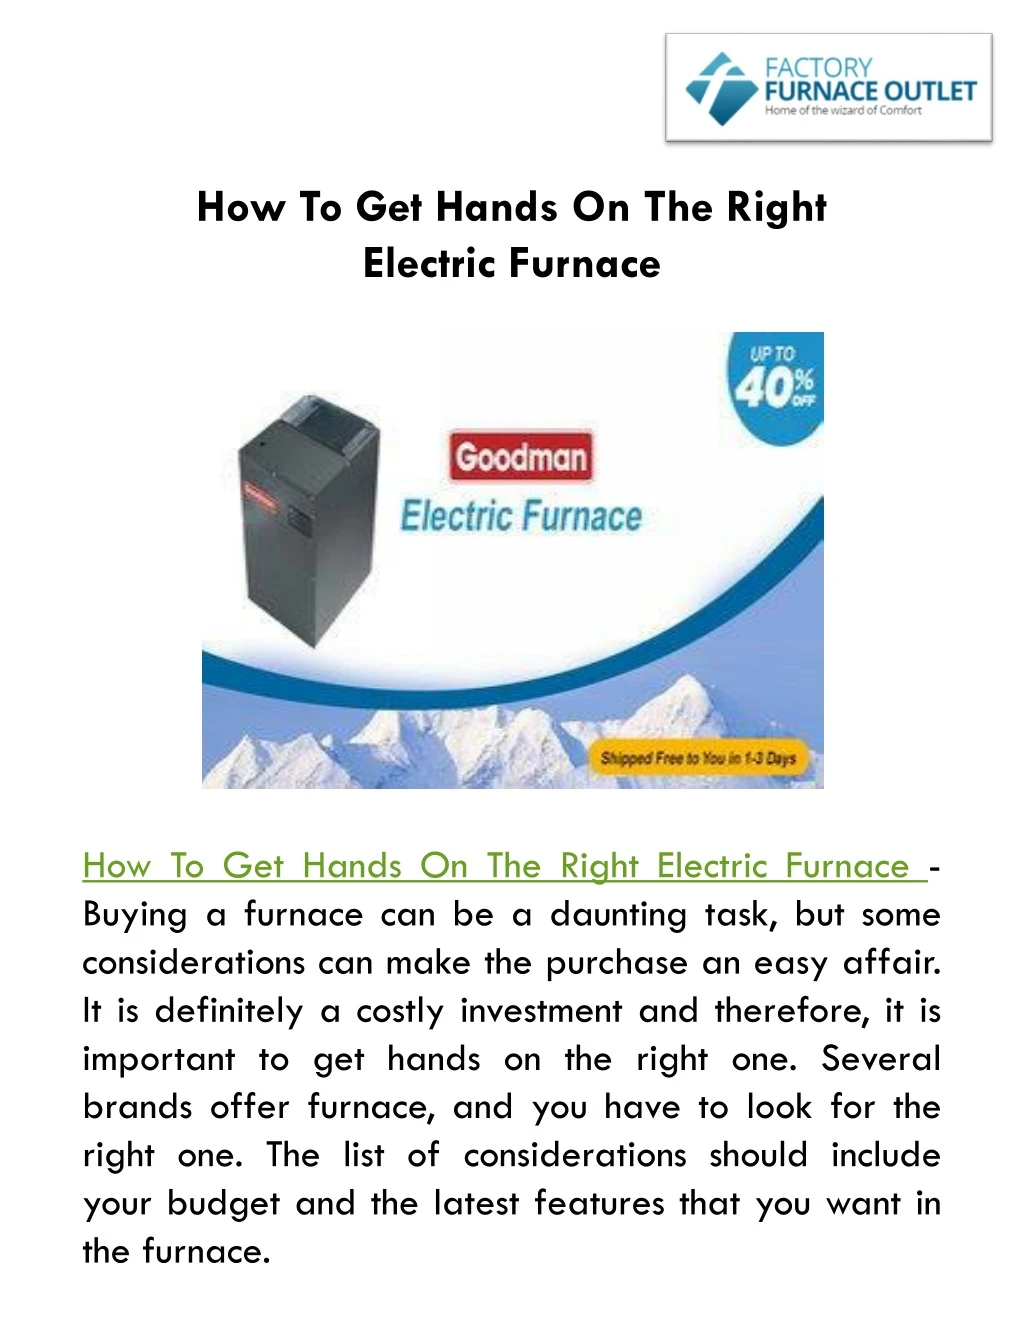 how to get hands on the right electric furnace